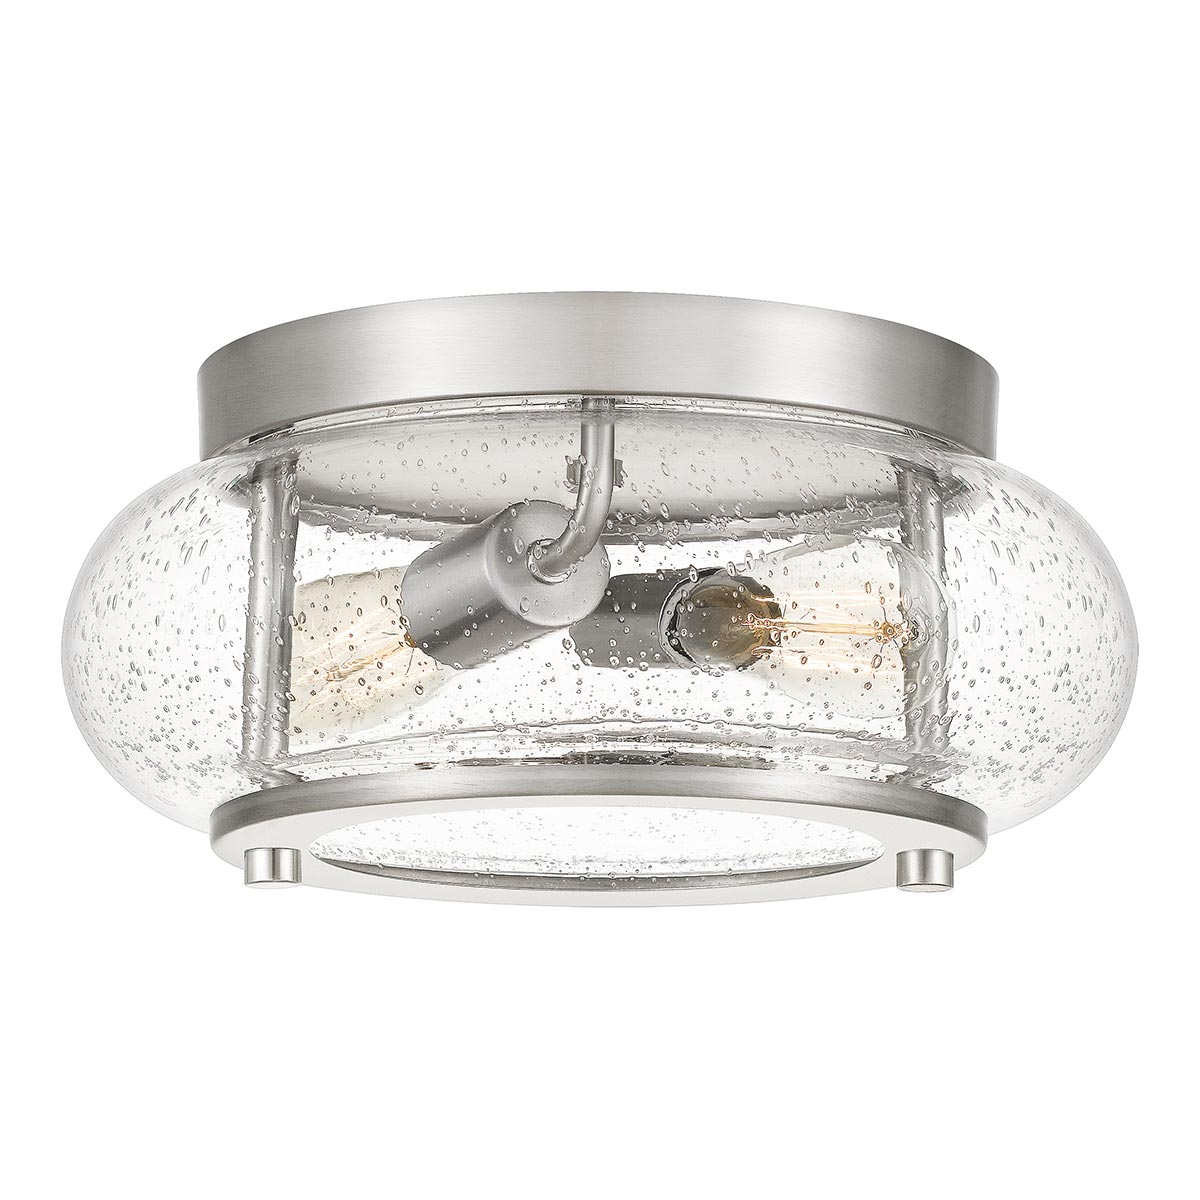 Quoizel Trilogy 2 Light Small Flush Low Ceiling Light Brushed Nickel